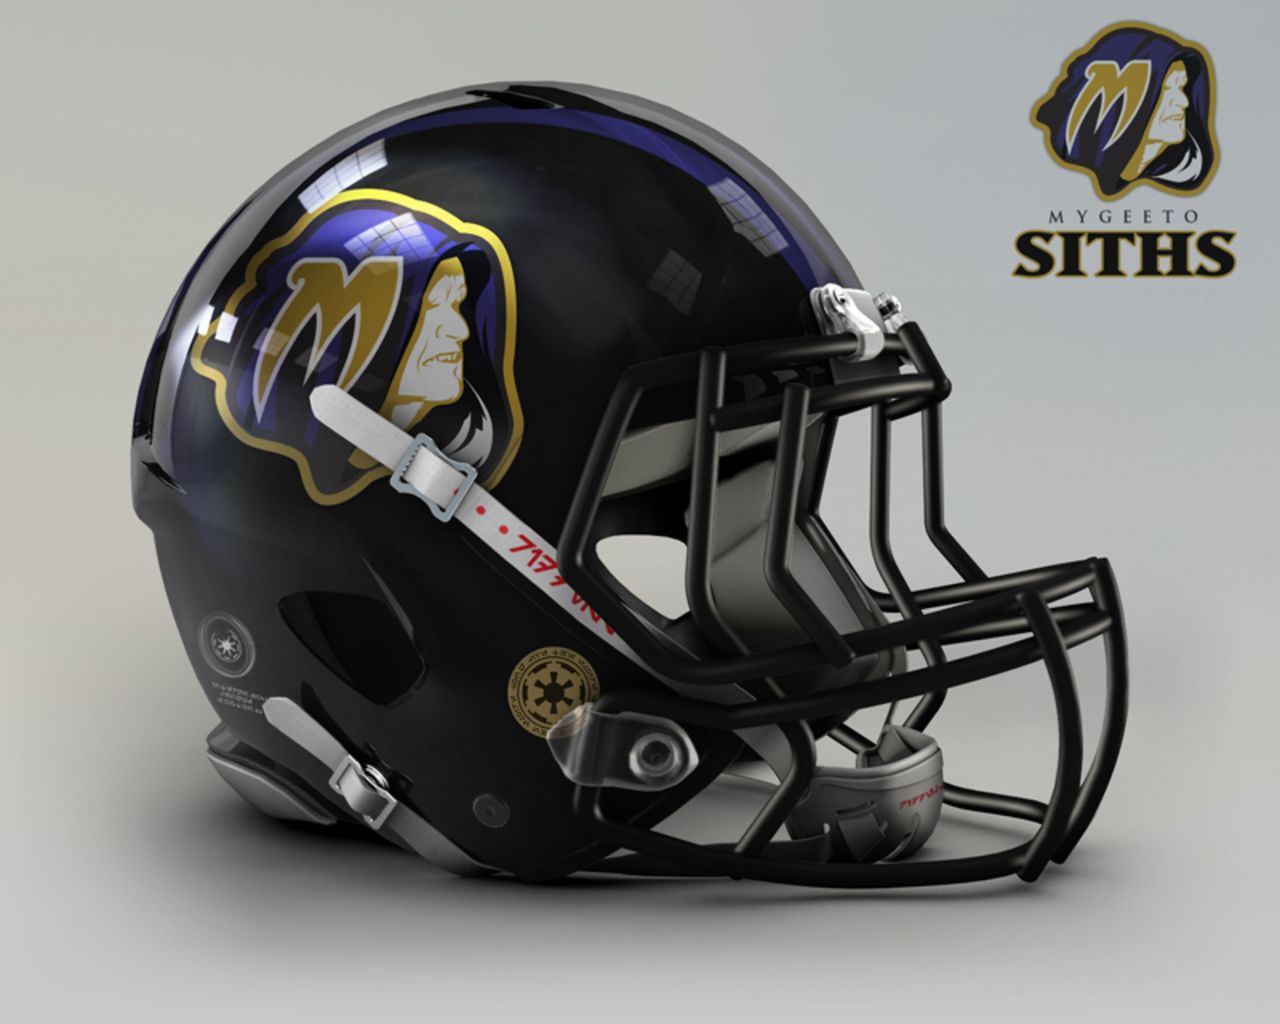 The <a href="http://www.baltimoreravens.com/" target="_blank" target="_blank">Baltimore Ravens</a> are not your average pretty team. The intimidating mix of purple and black just screams Dark Side, so it's not surprising to see the evil Emperor emblazoned on this helmet.